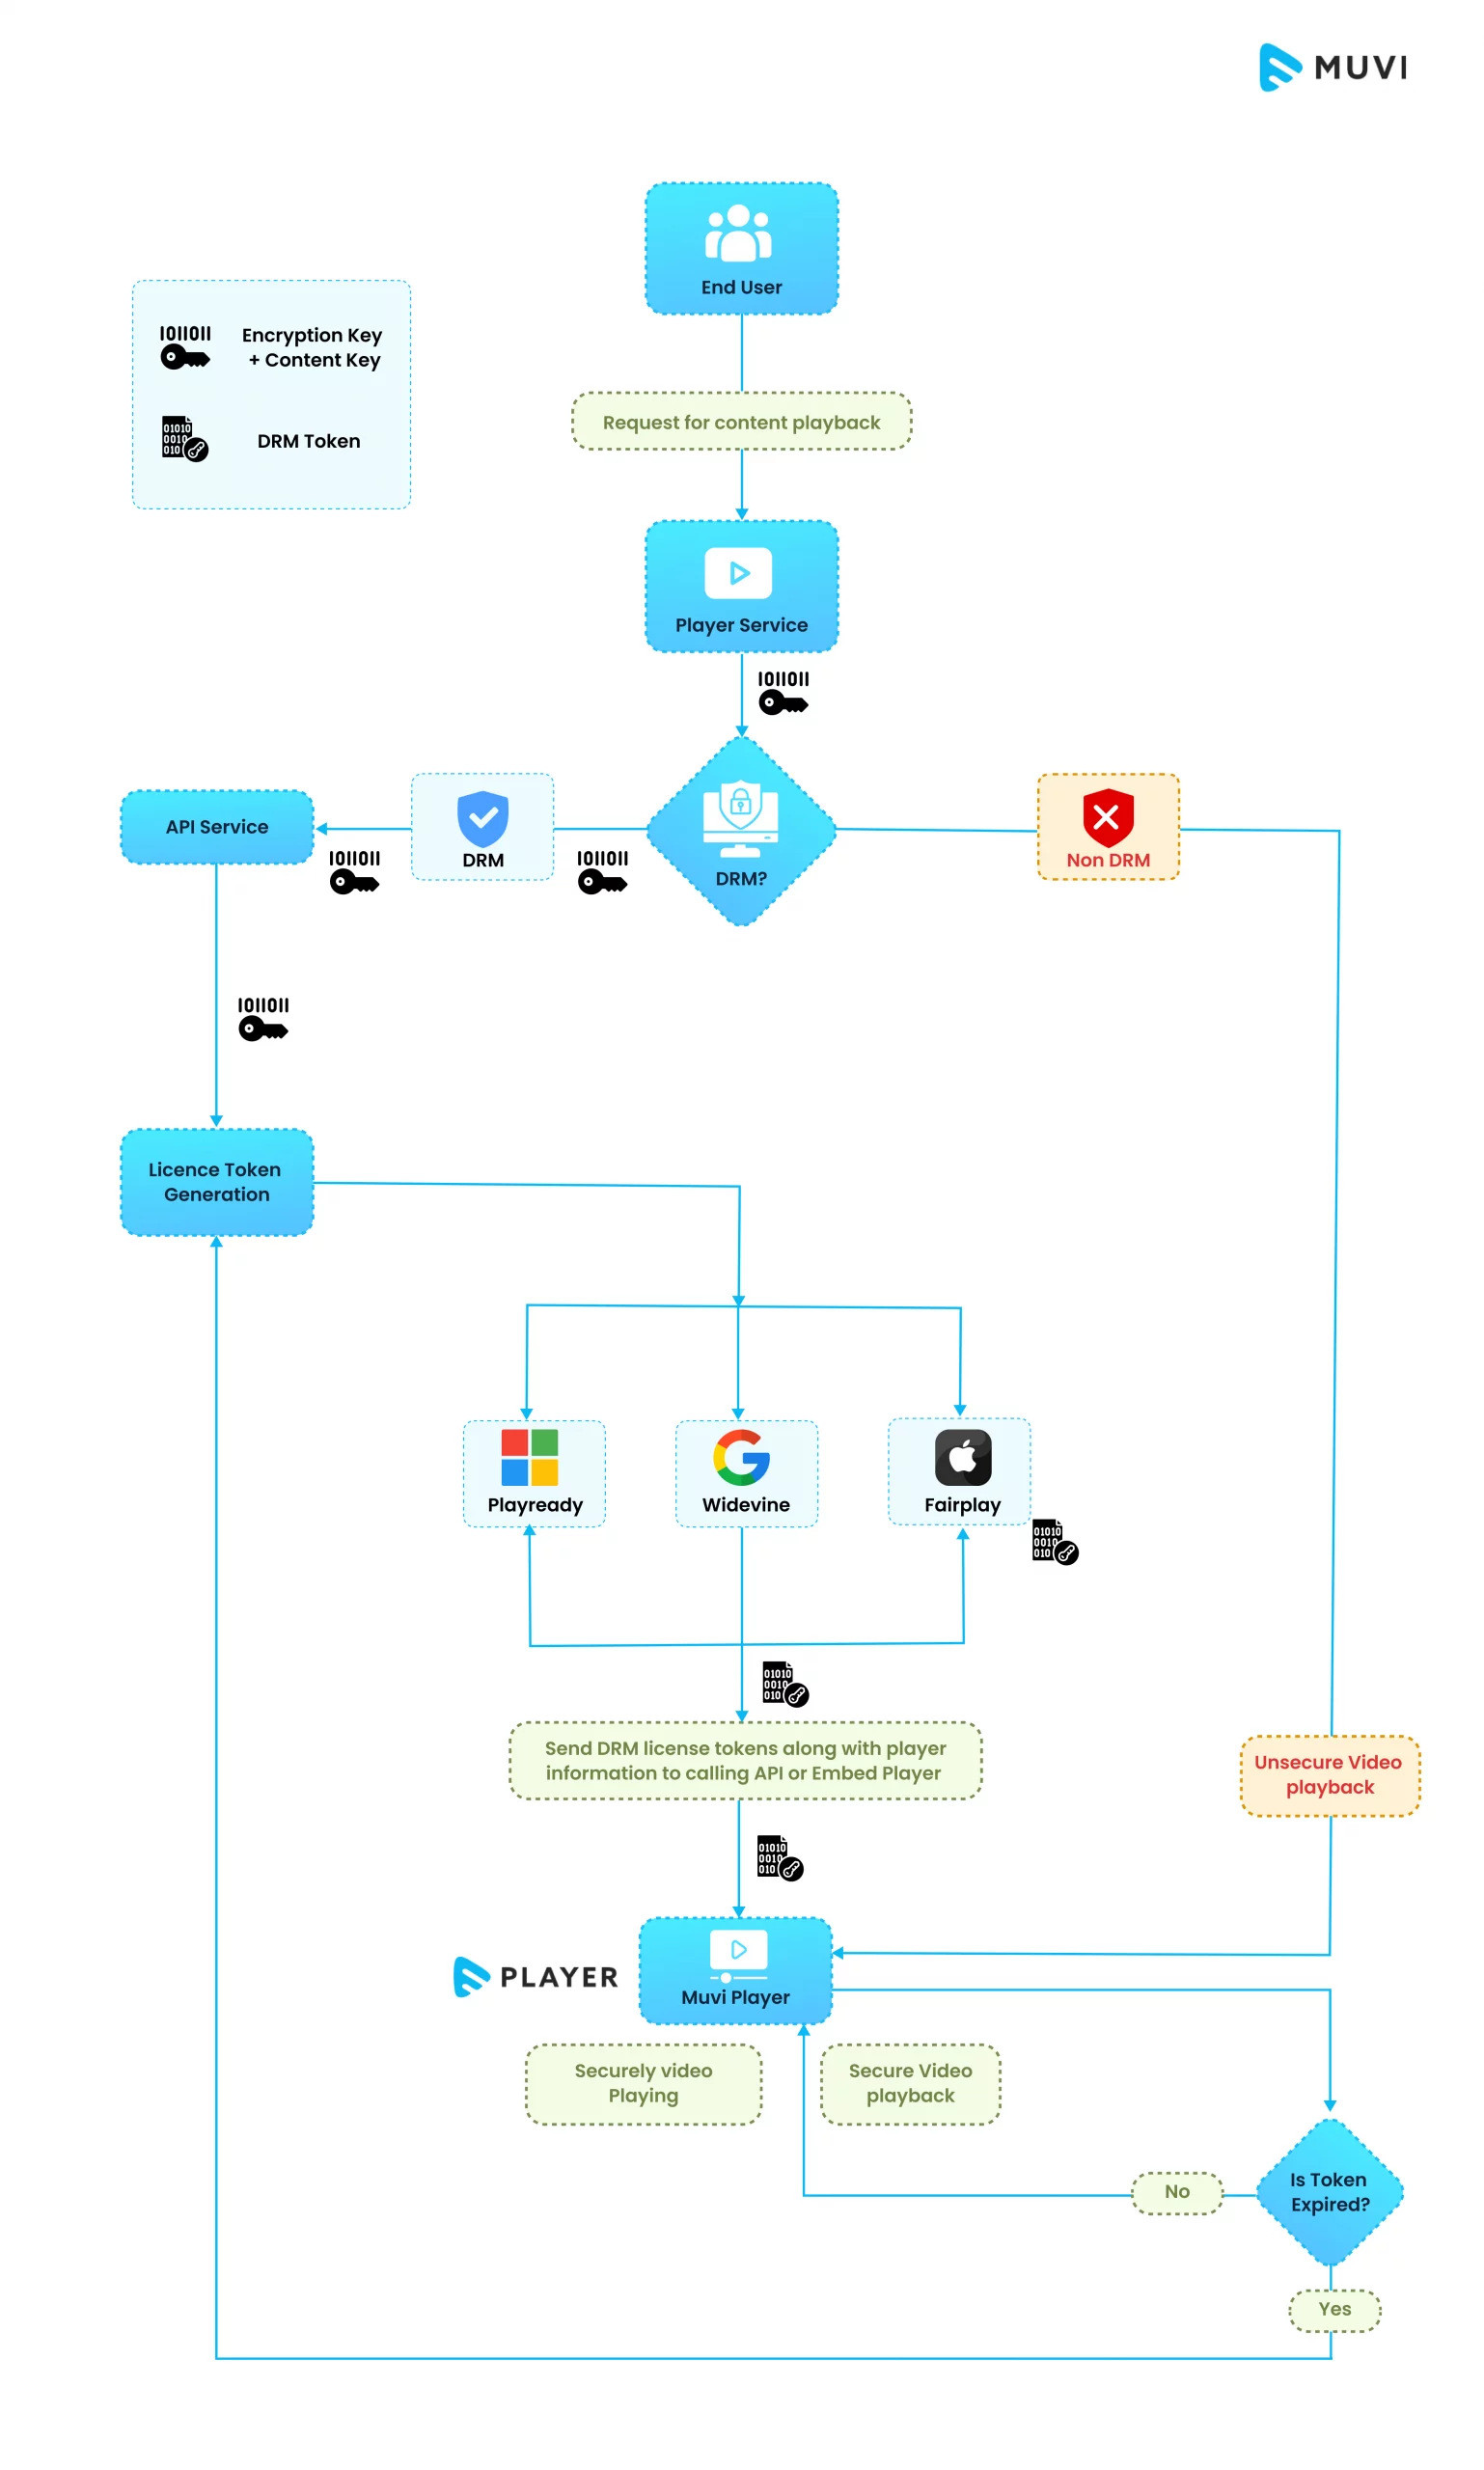 The DRM decryption process has been depicted in this flowchart